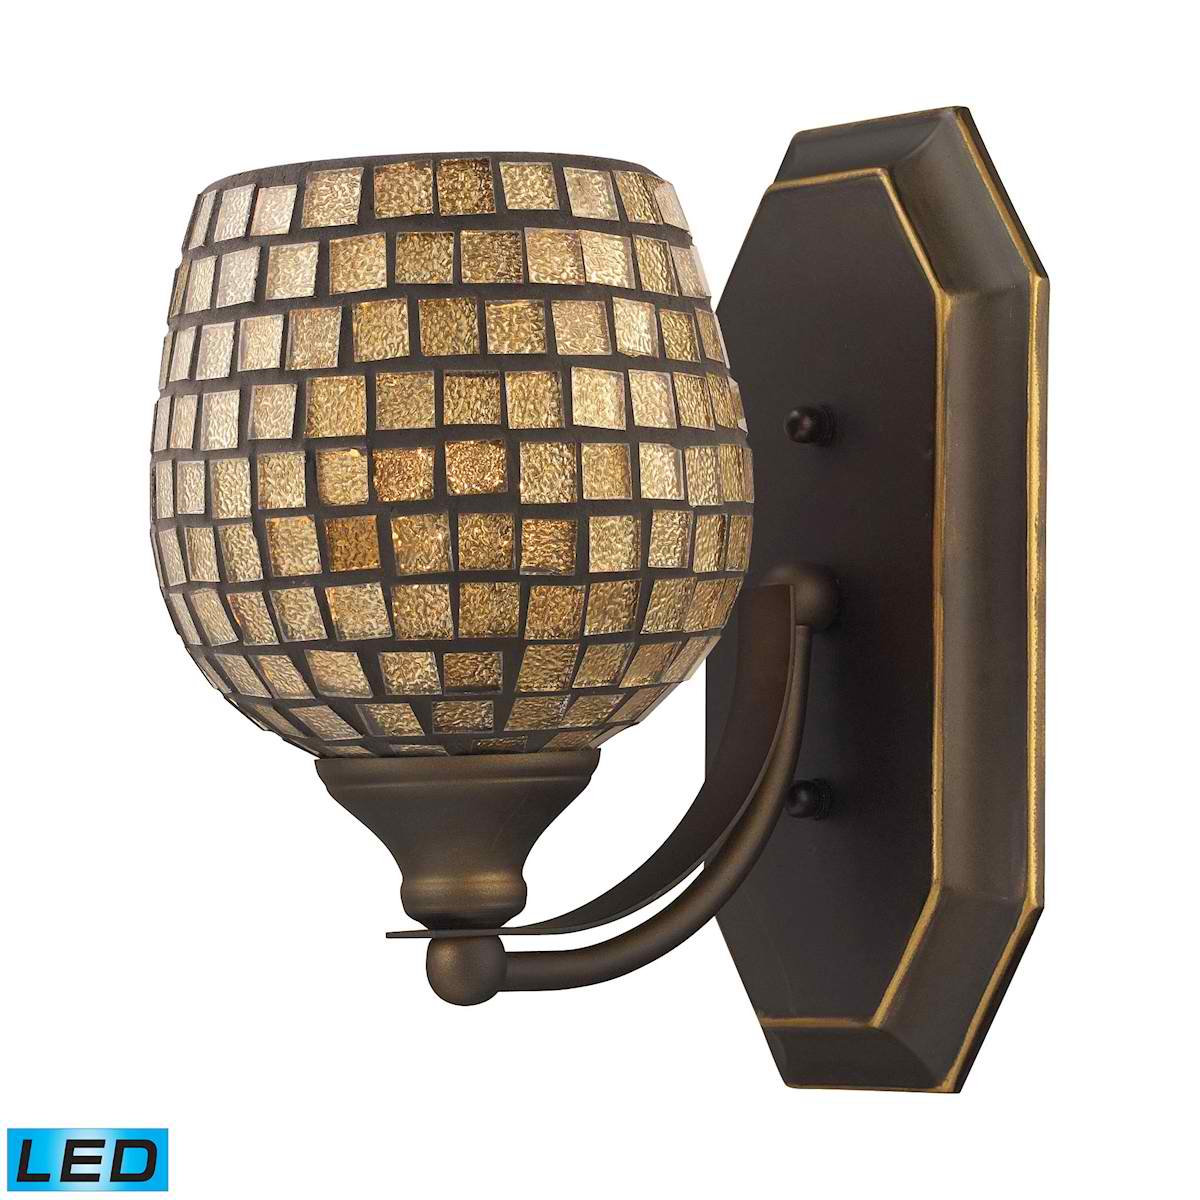 1 Light Vanity in Aged Bronze and Gold Mosaic Glass - LED Offering Up To 800 Lumens (60 Watt Equivalent)